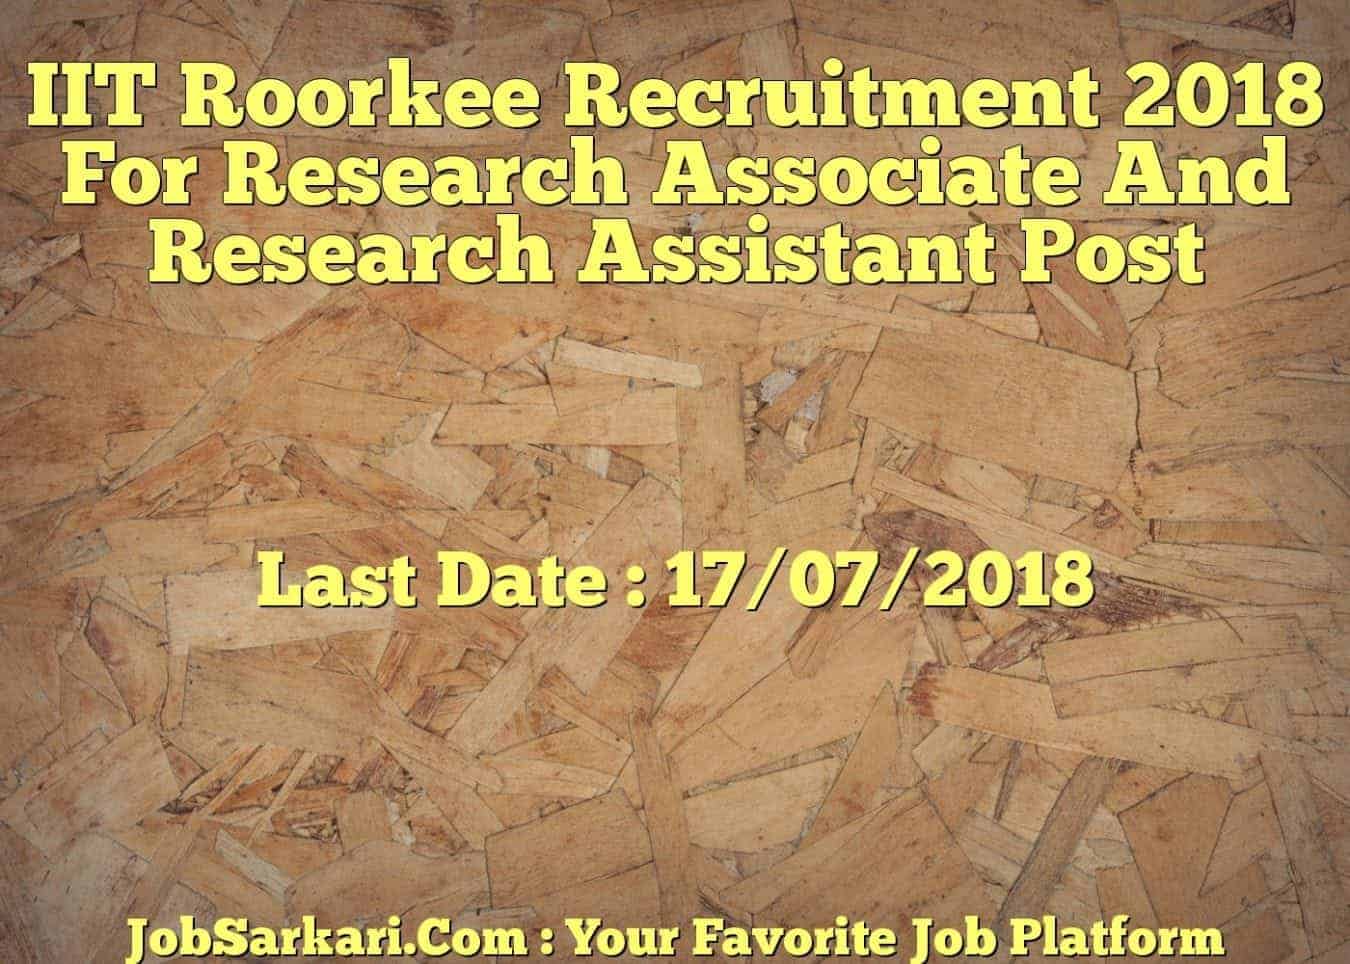 IIT Roorkee Recruitment 2018 For Research Associate And Research Assistant Post